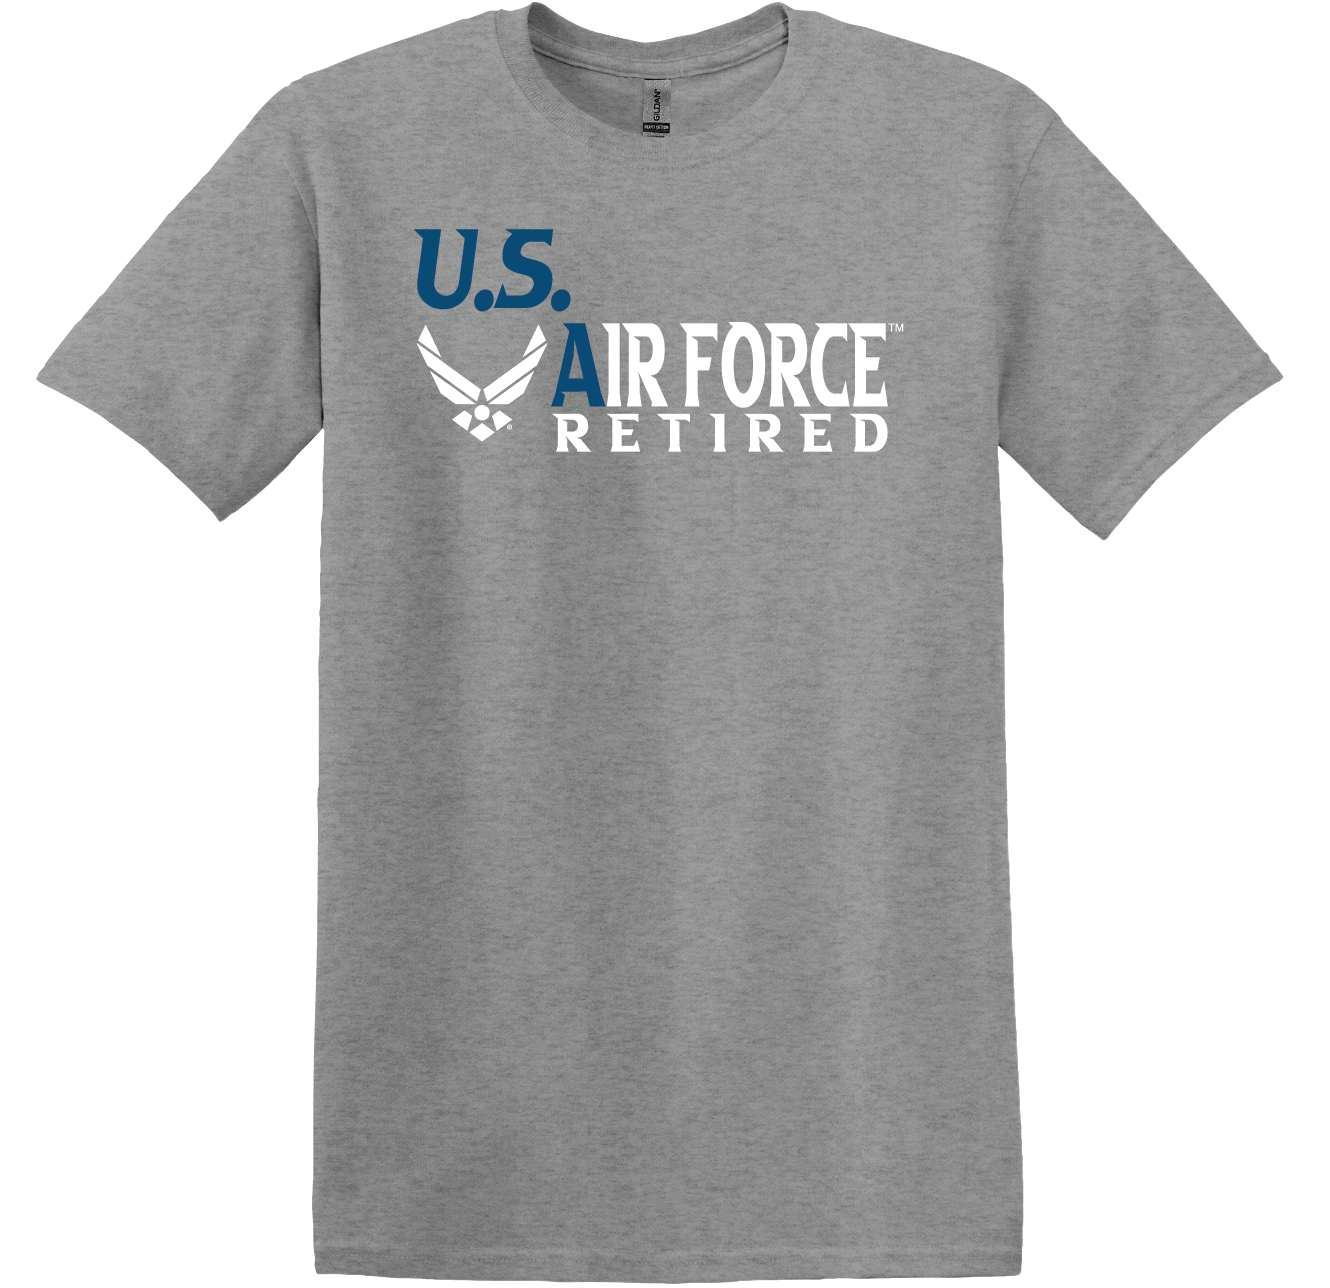 U.S. Air Force Retired with Symbol on Unisex Short Sleeve T-Shirt